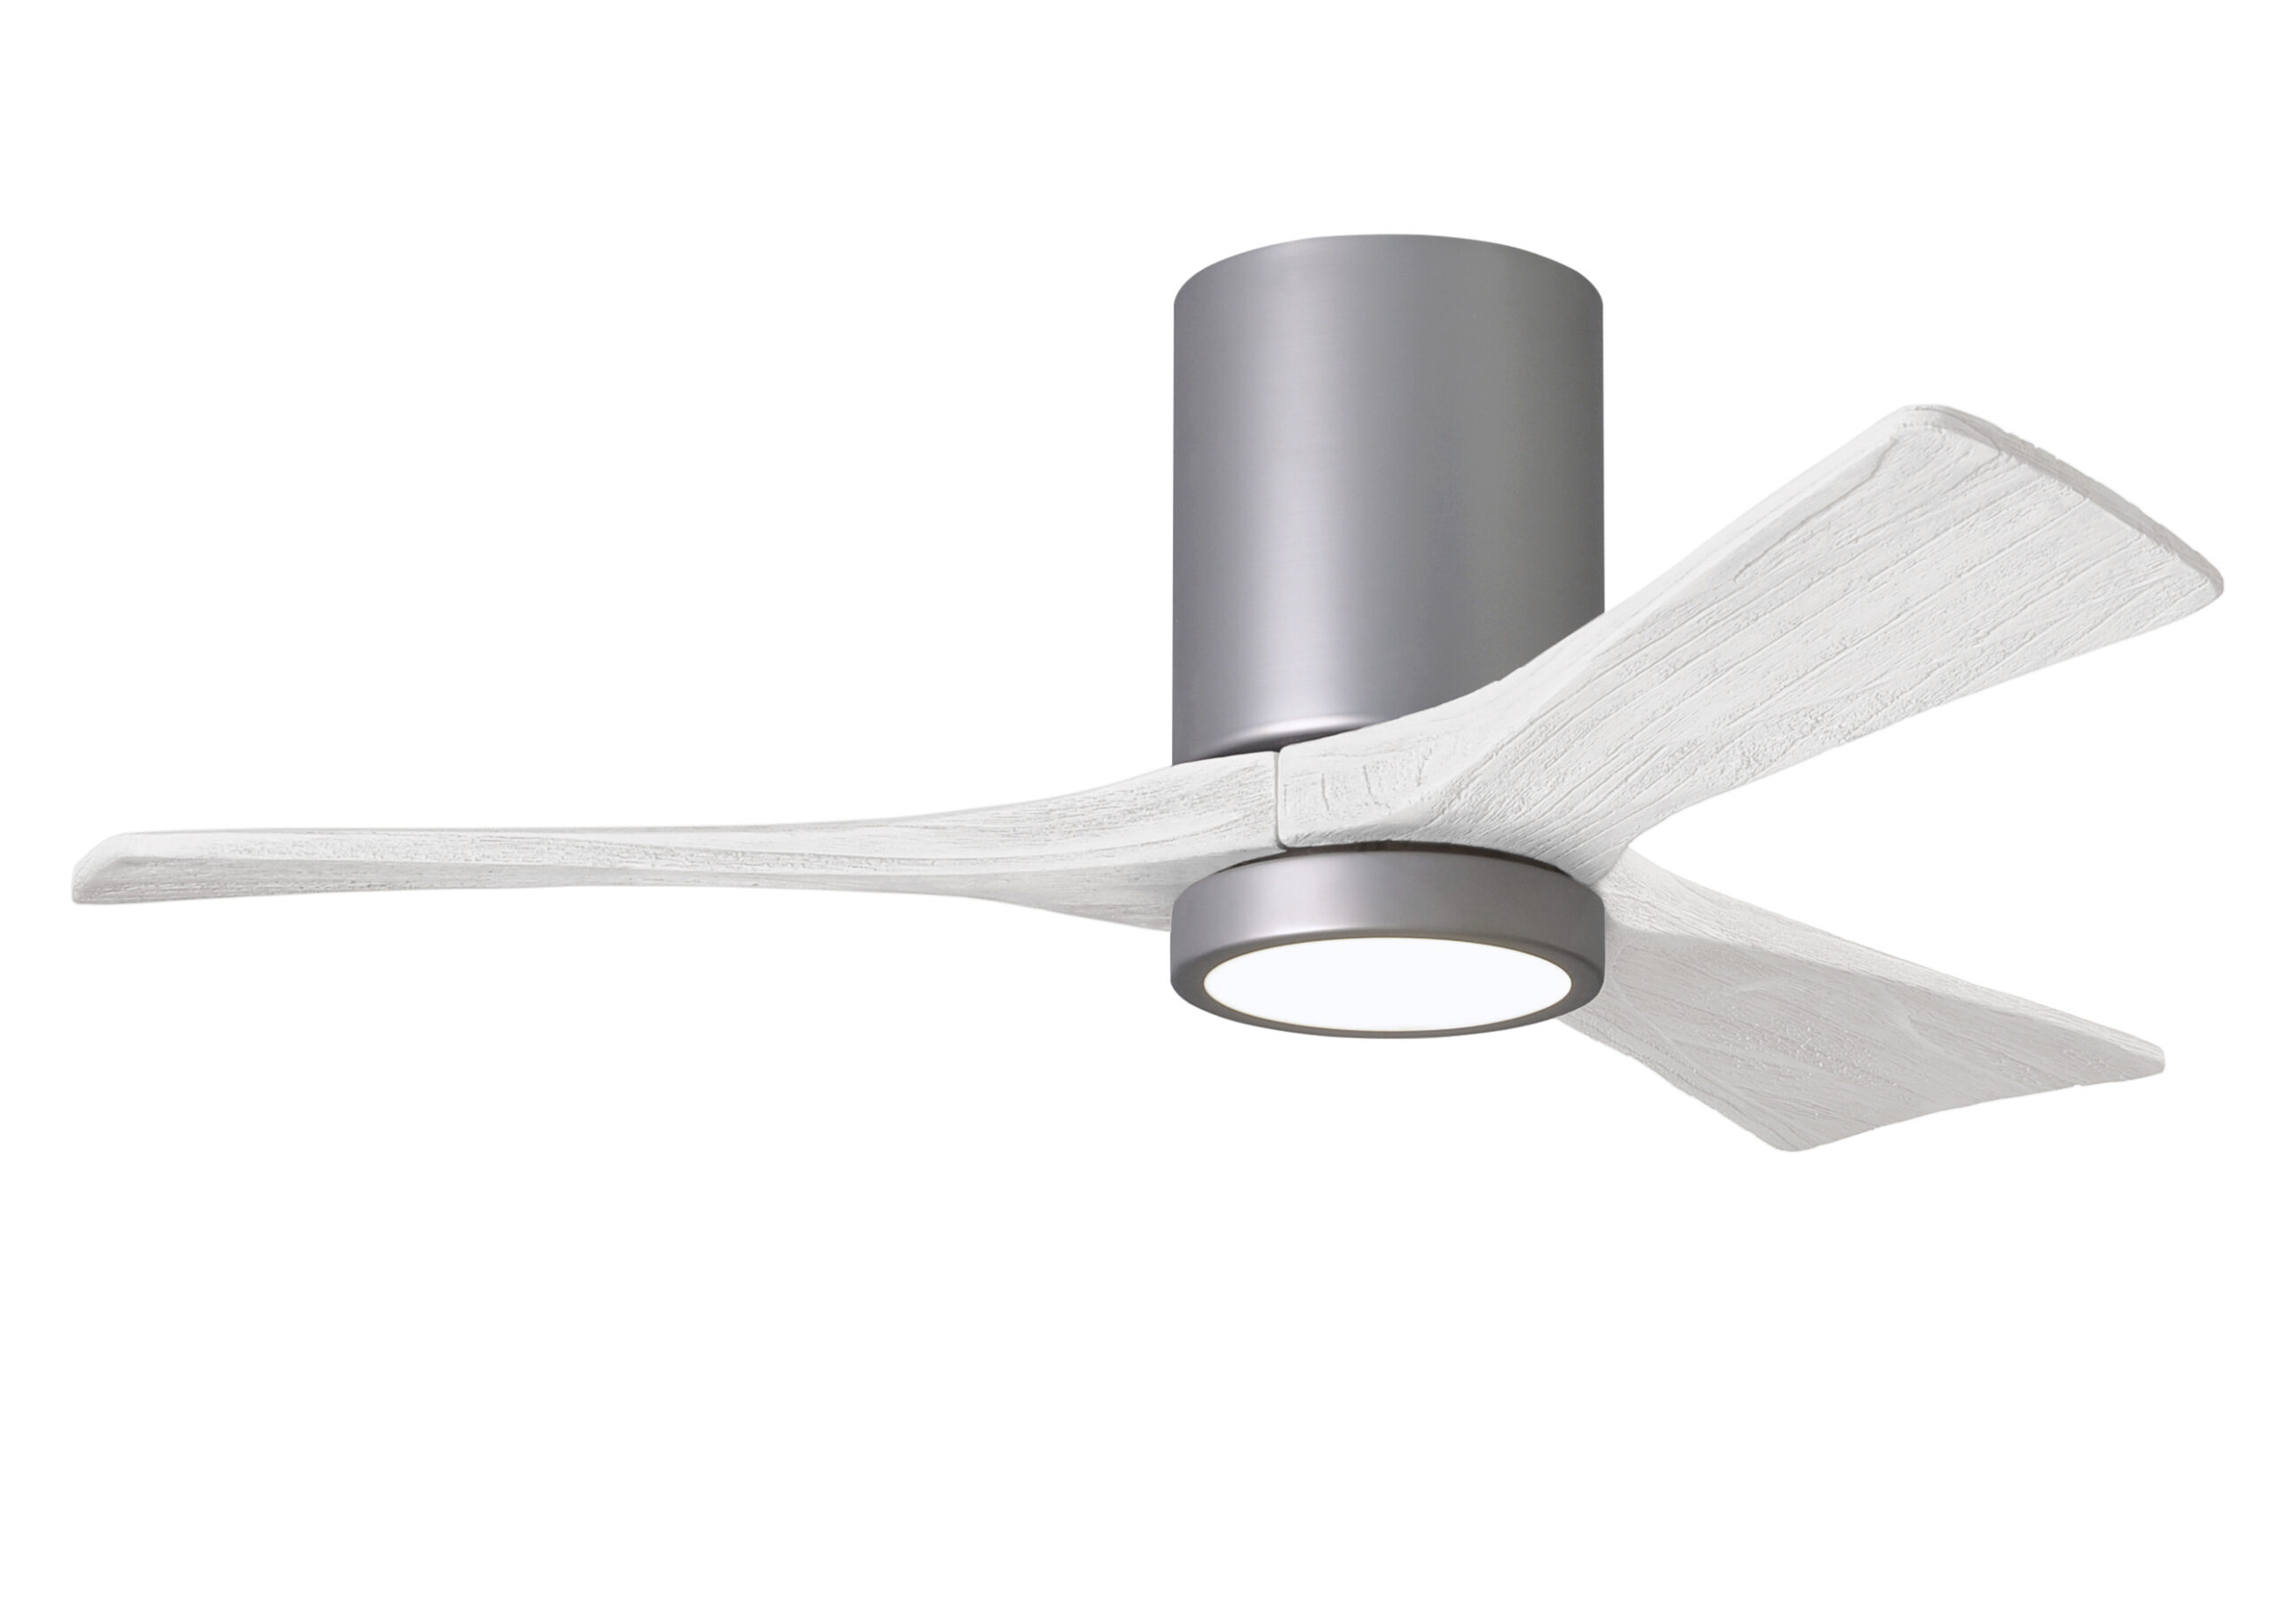 Irene-3HLK Ceiling Fan in Brushed Nickel Finish with 42